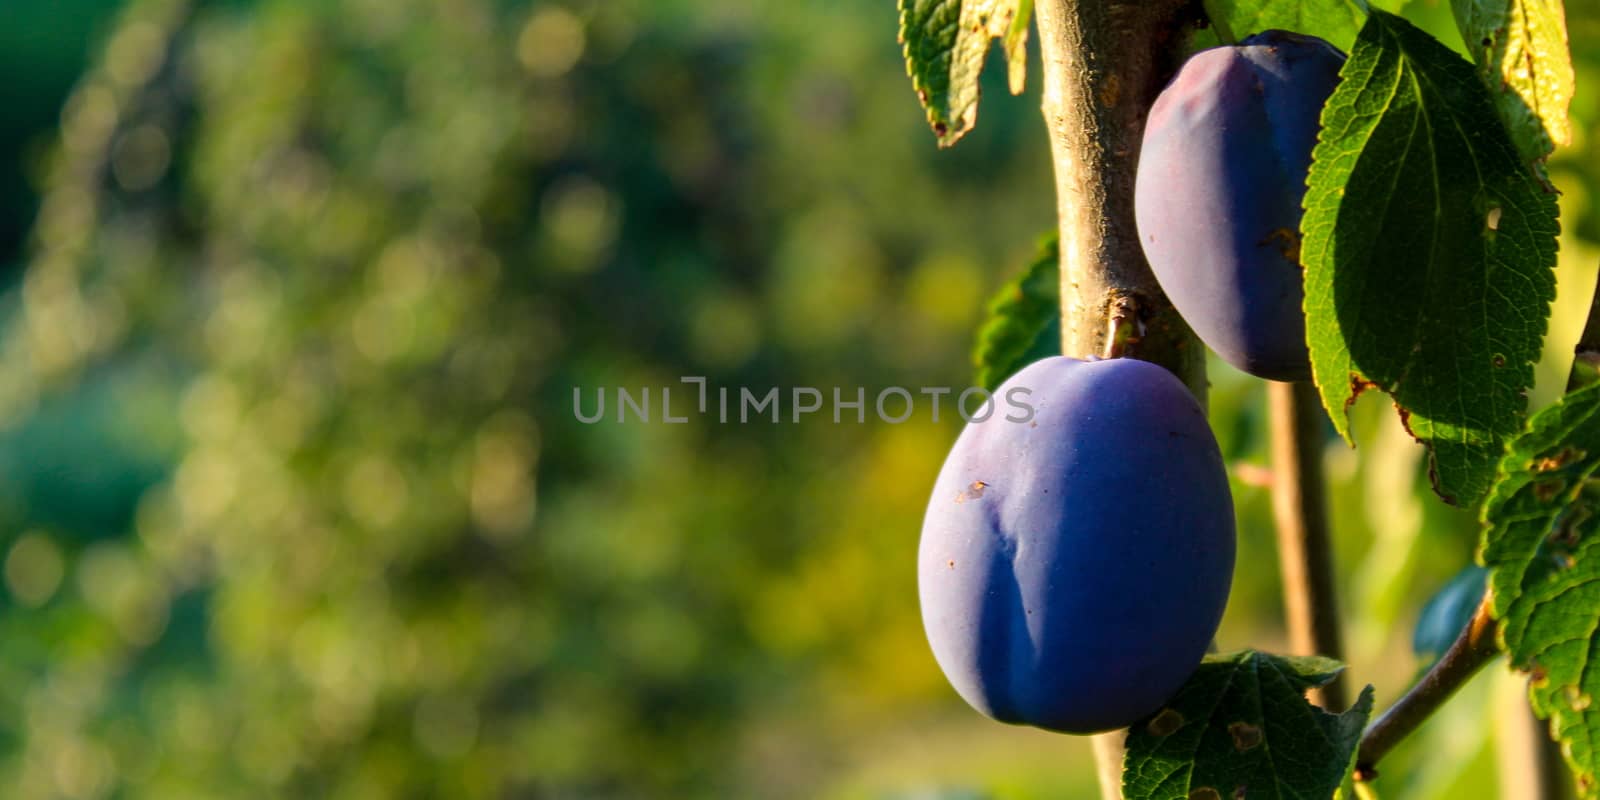 Banner. Blue ripe plums on a branch with leaves with a blurred background. Ideal background for copy text. by mahirrov